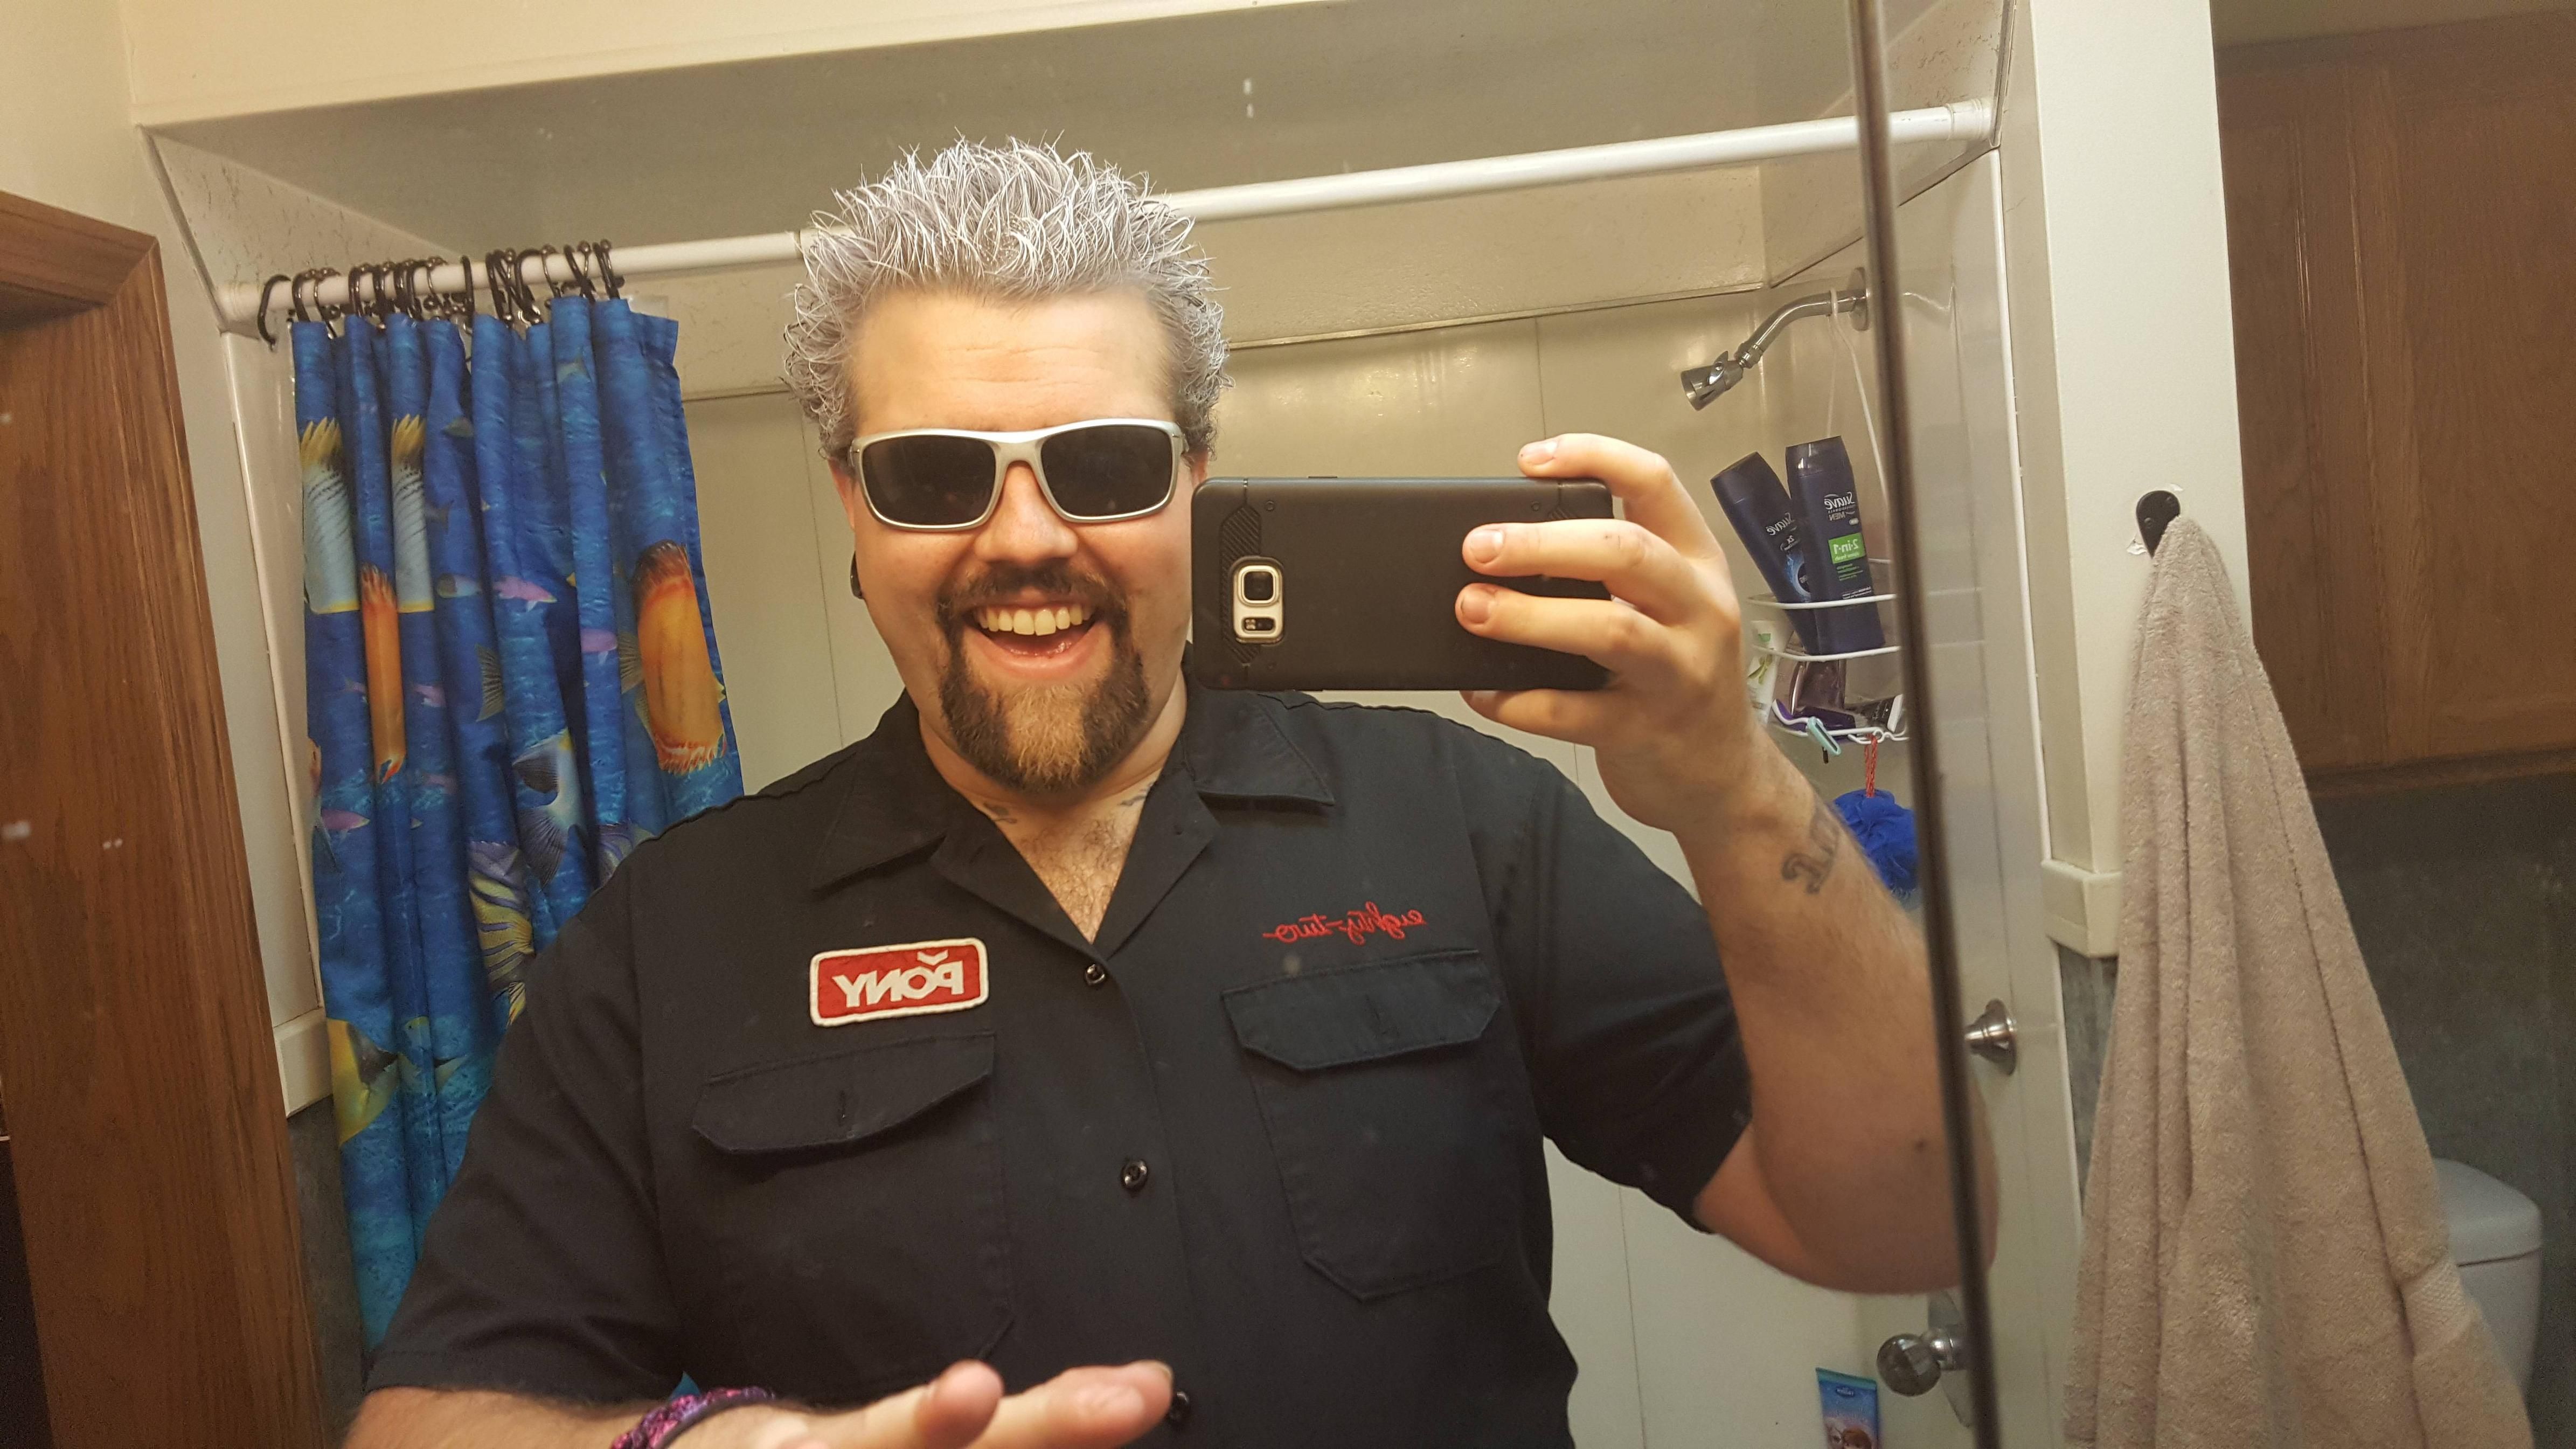 I thought my Guy Fieri costume came along nicely